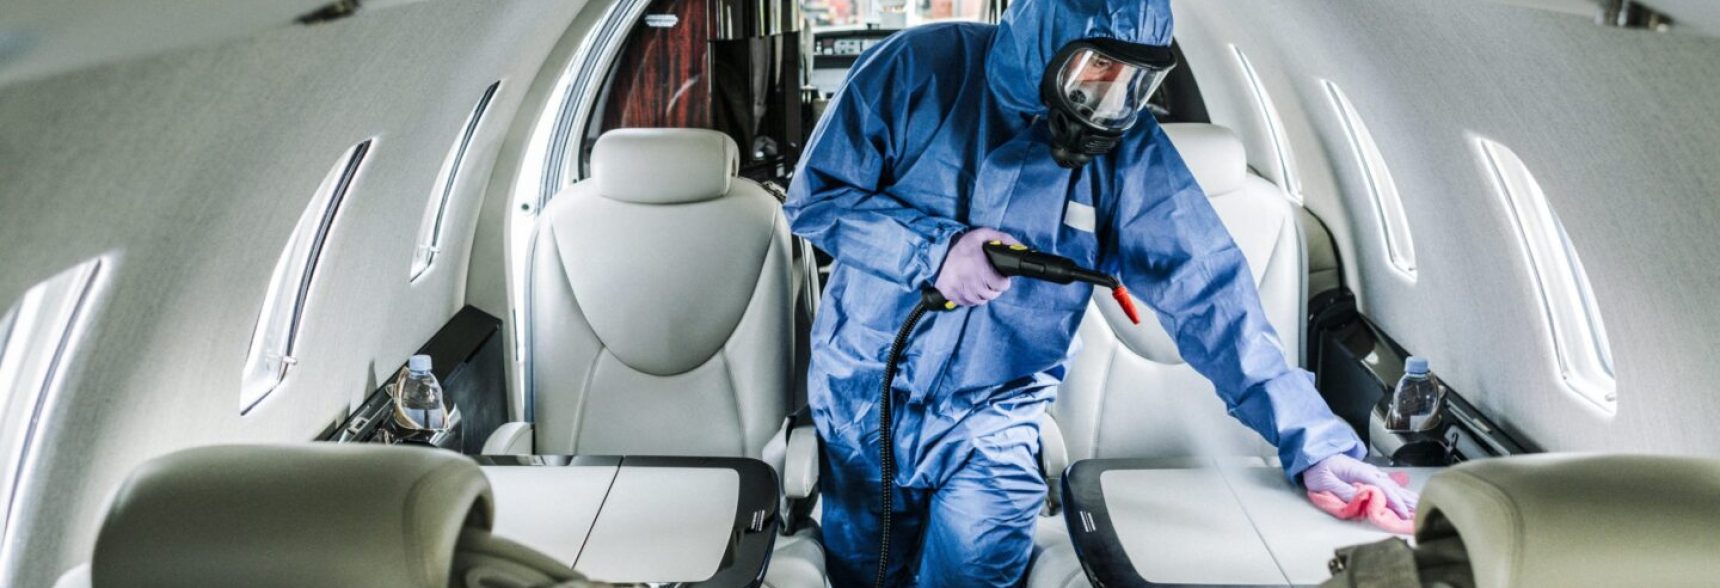 A cleaner in blue coveralls disinfecting the passenger cabin before the passengers arrival